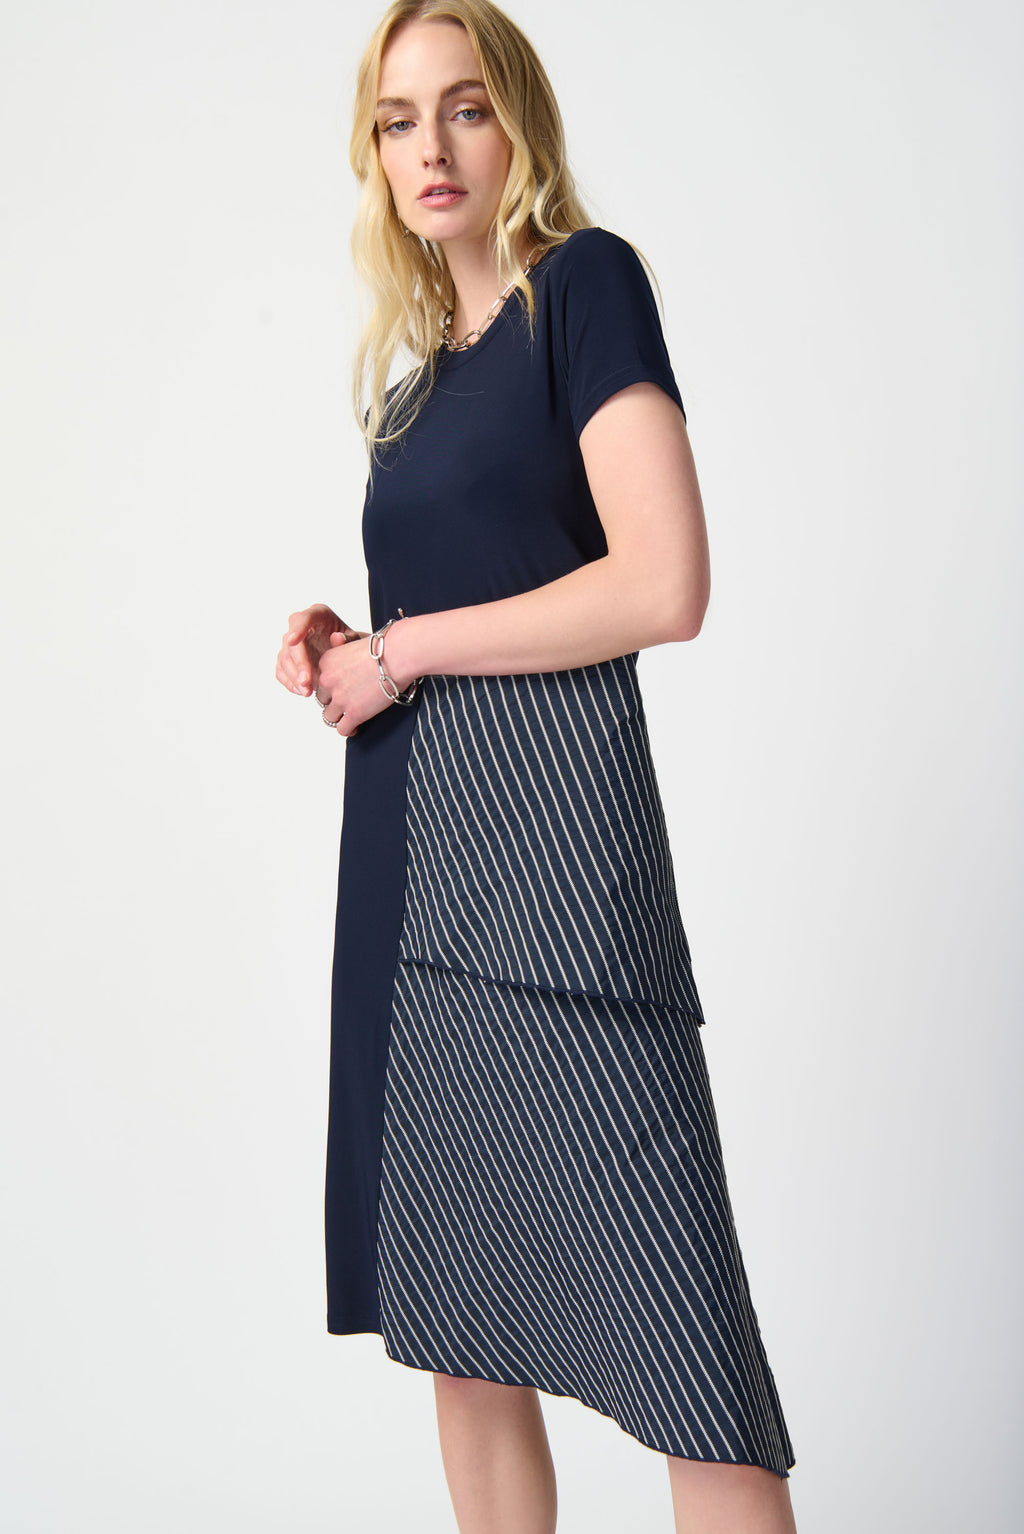 This unique silky knit dress exudes refinement and confidence. Crafted with a beautifully striped memory asymmetrical hem, this trapeze dress will make a subtle yet striking addition to your wardrobe. Featuring a crewneck and short sleeves, it is the perfect piece to stand out on any occasion.